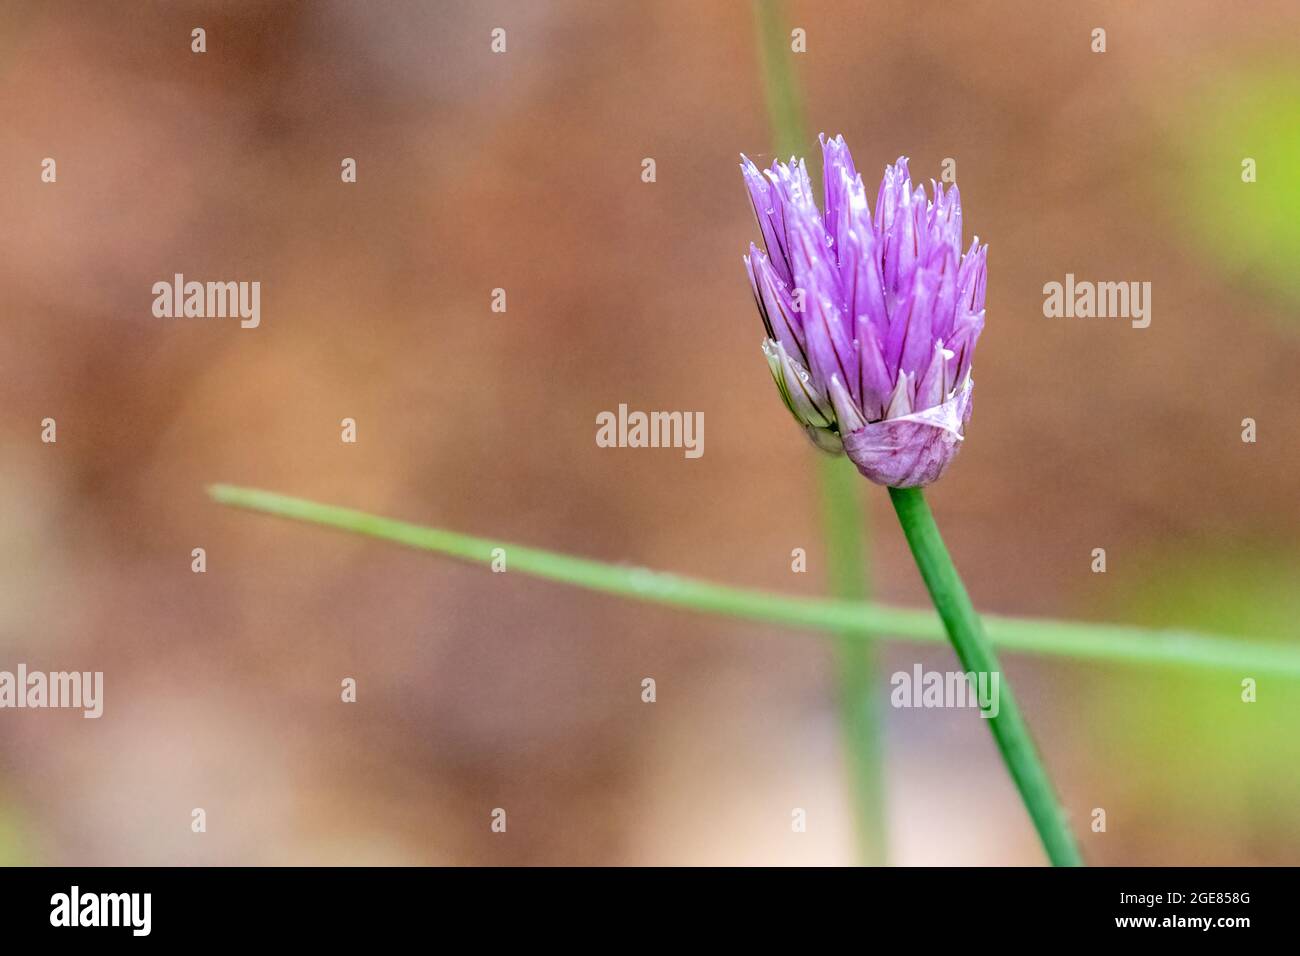 small blooming green onion chive plant otherwise known as alliums with purple blooms Stock Photo